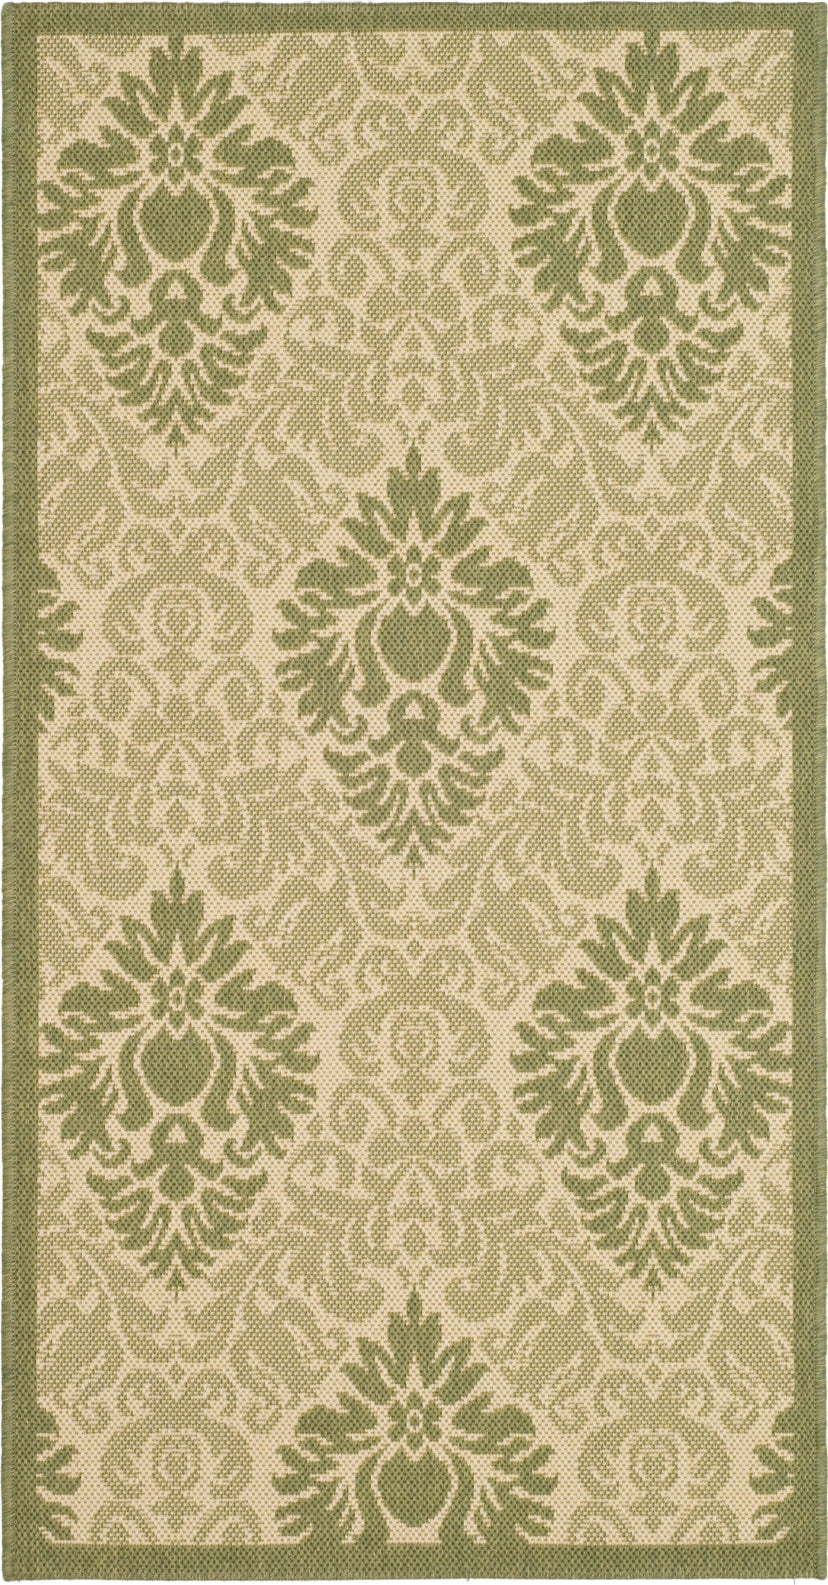 Safavieh Courtyard CY2714 Natural/Olive Area Rug main image